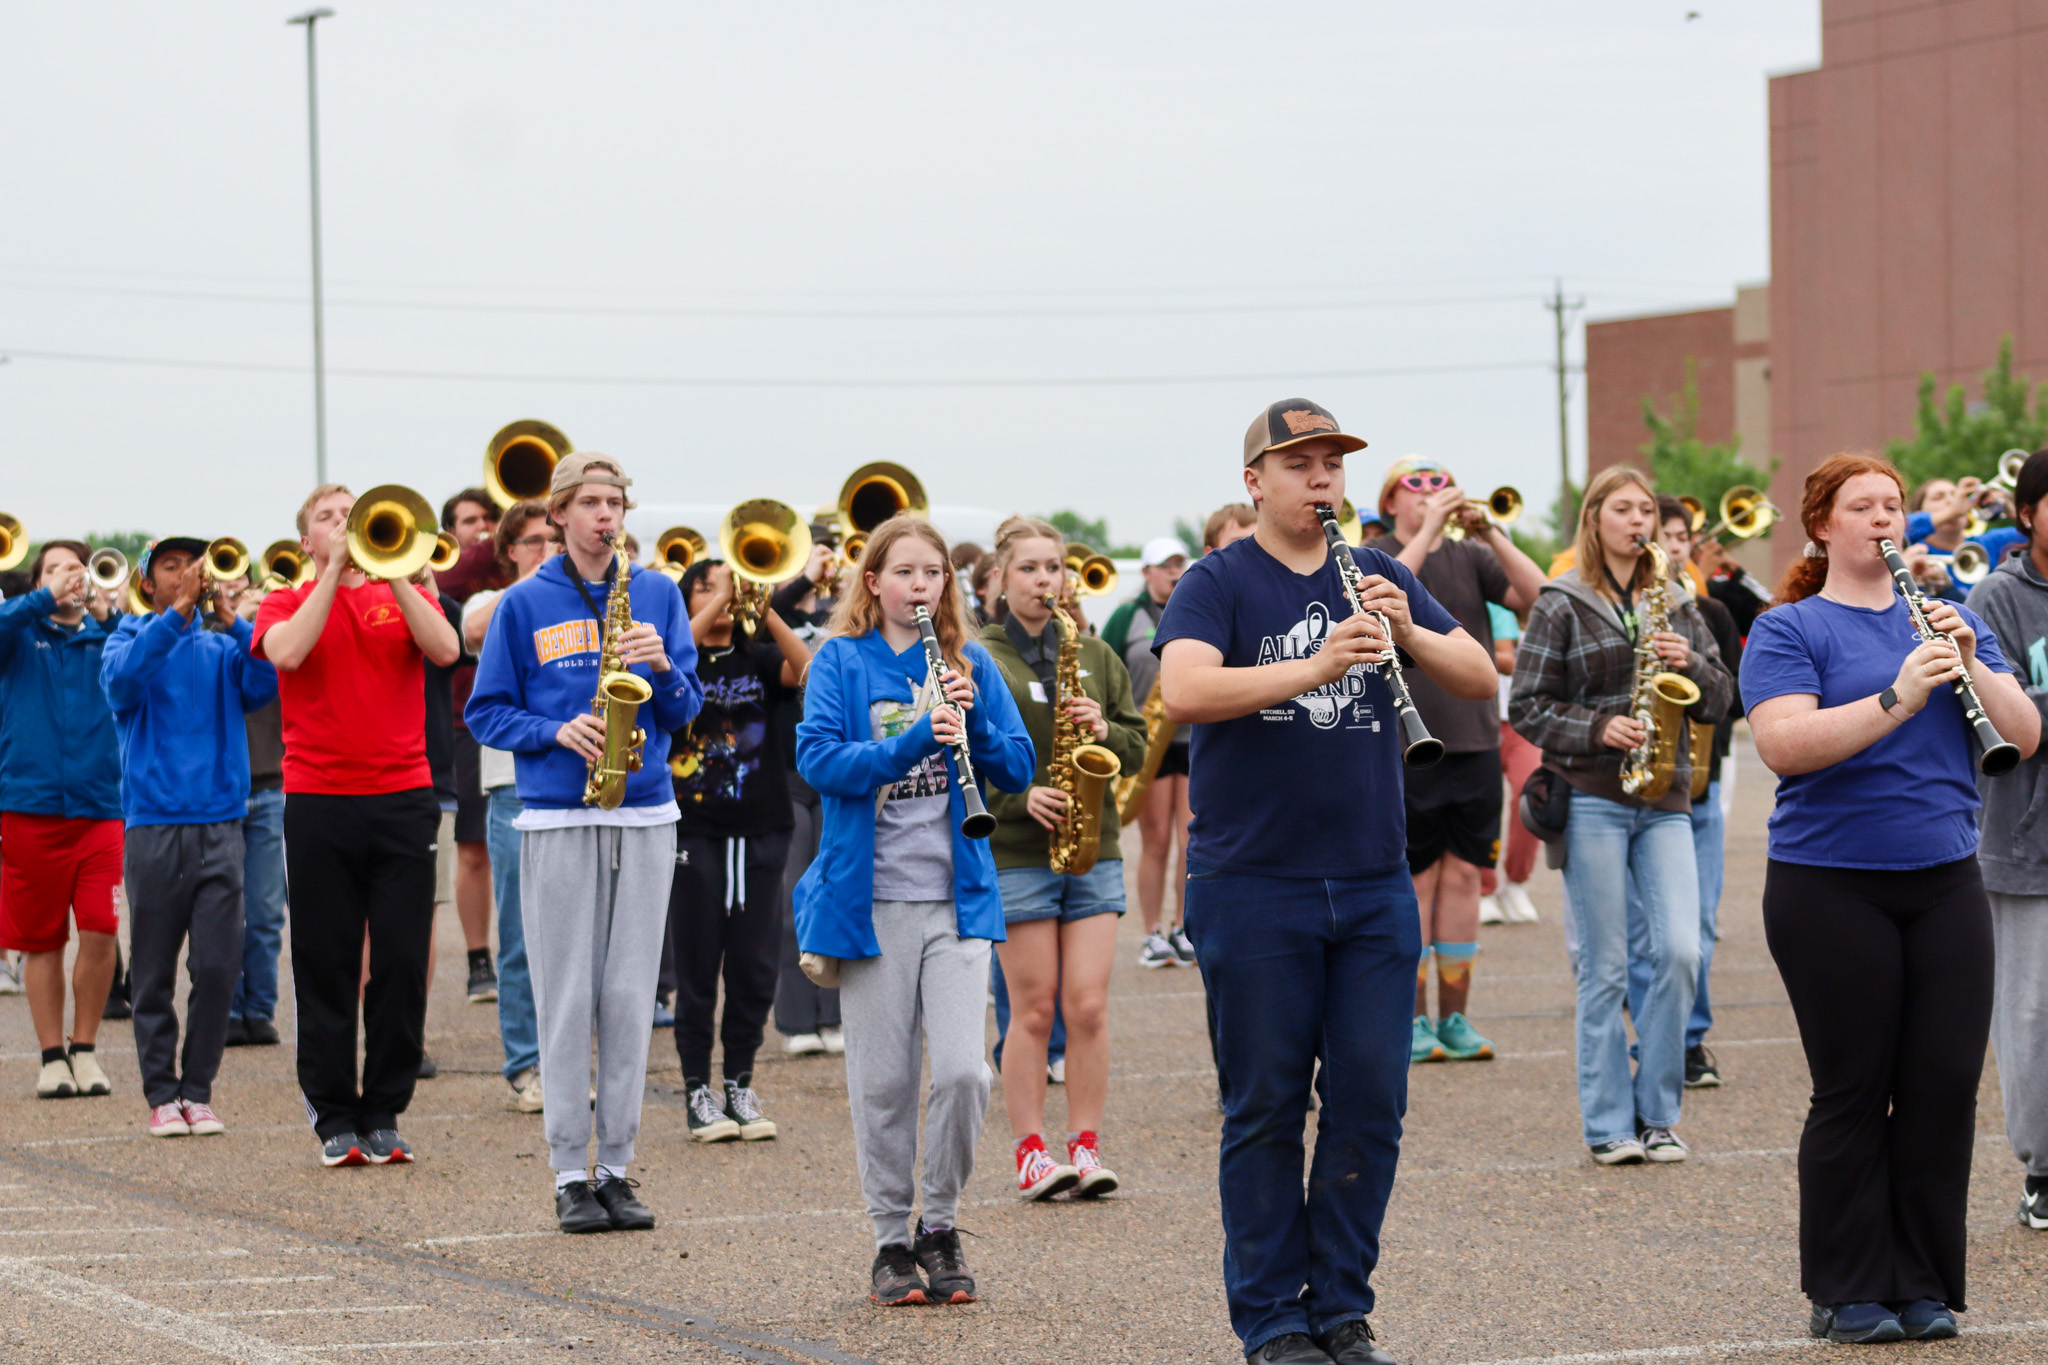 CHS marching band practicing